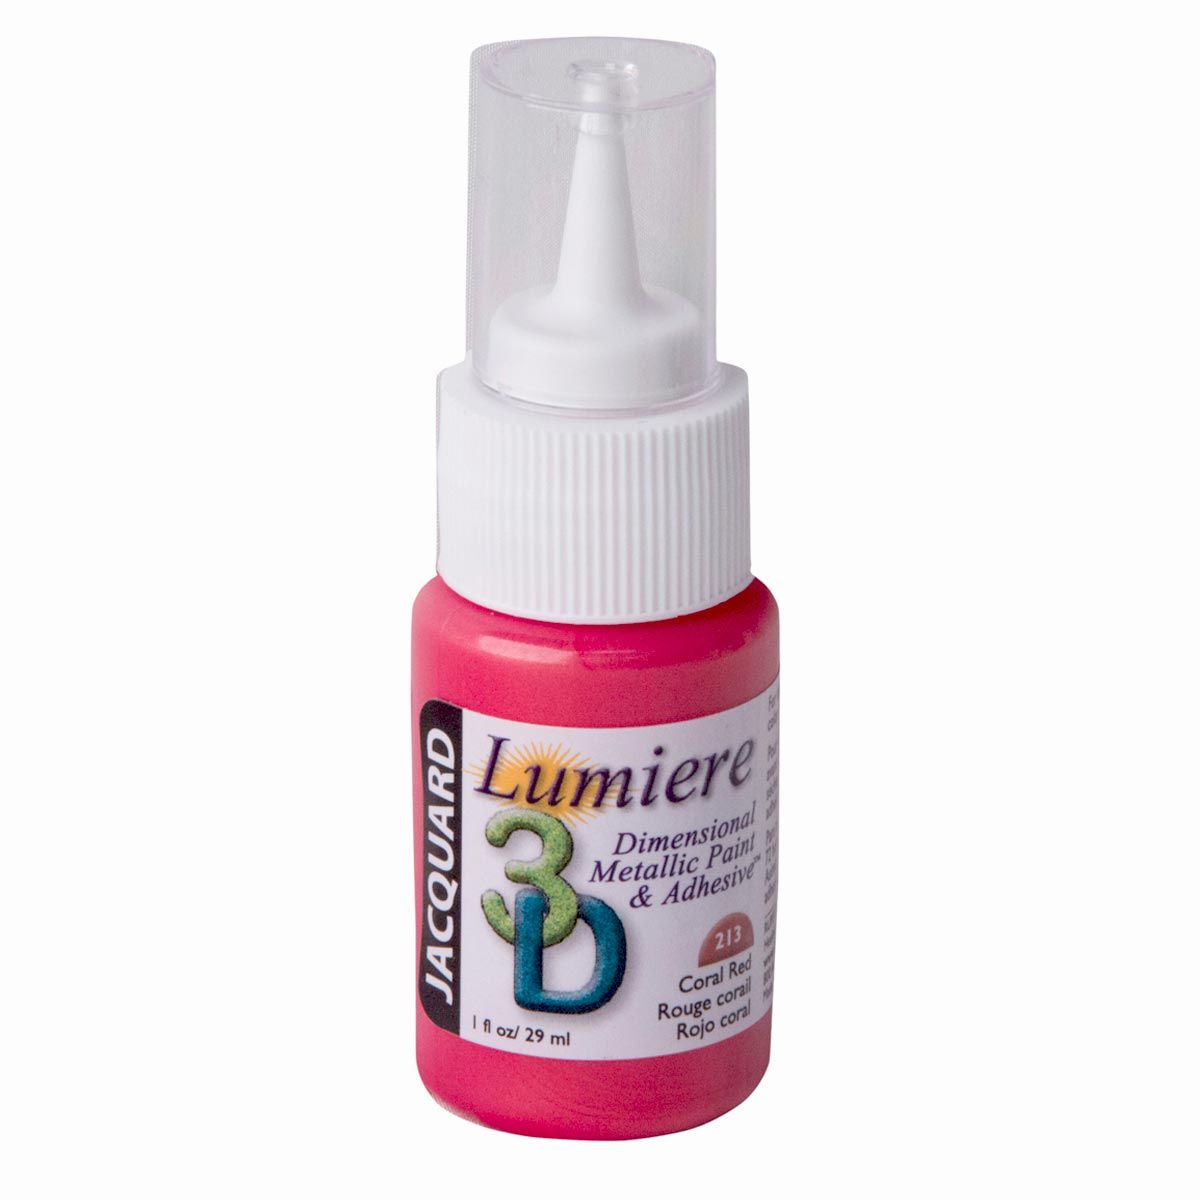 Lumiere 3D Metallic Paint & Adhesive, Coral Red 1oz